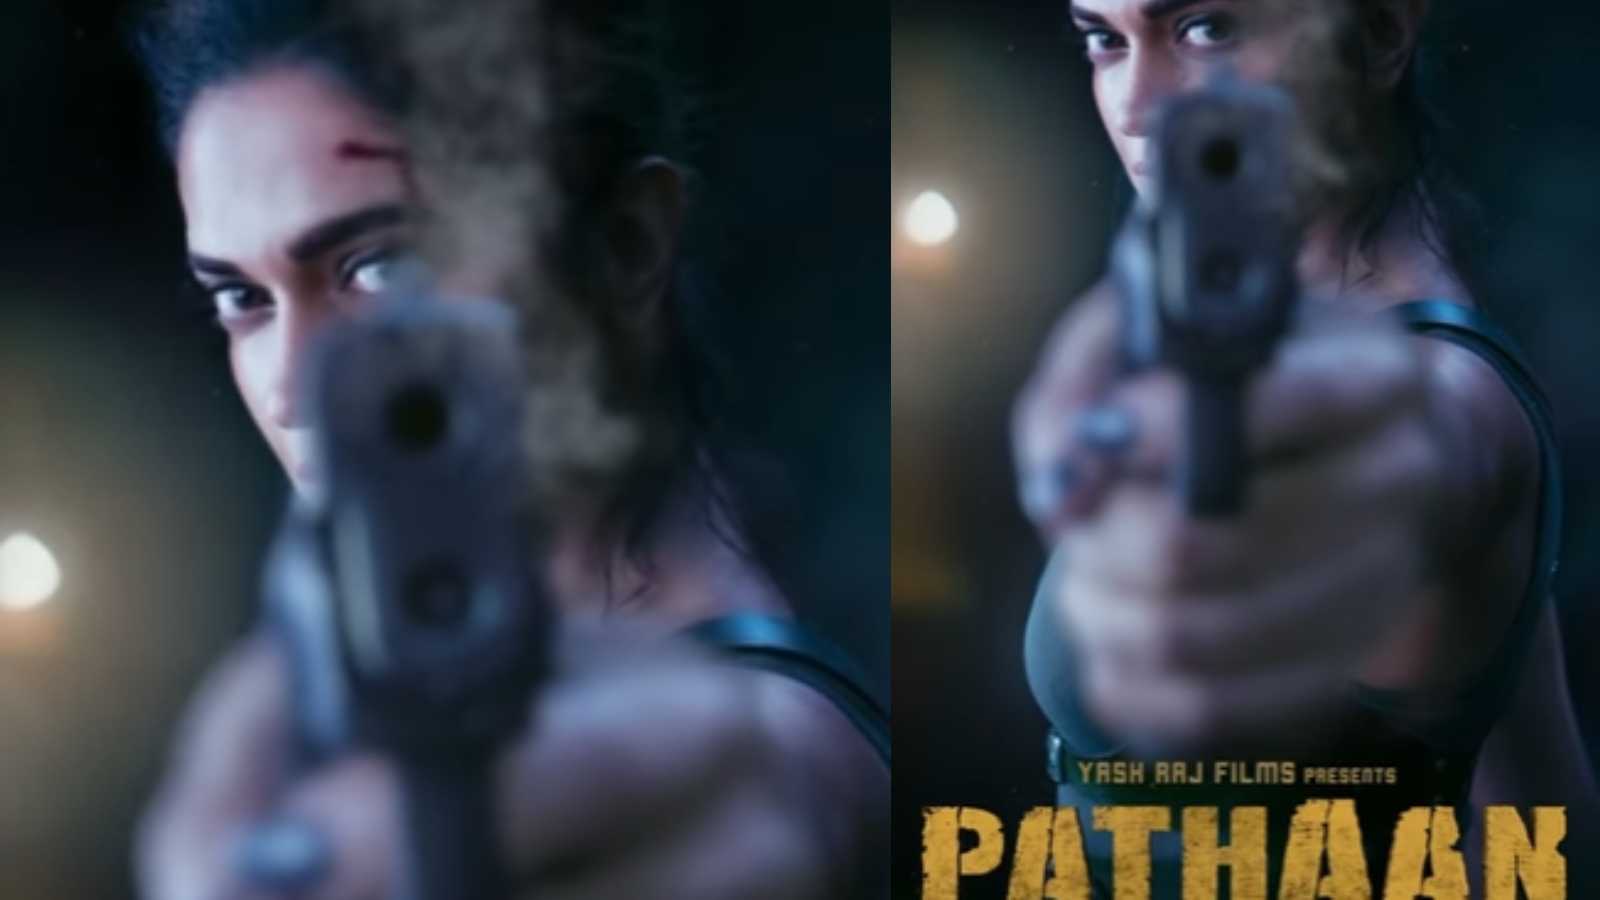 Pathaan: A fiery Deepika Padukone strikes a bullet straight into your heart in this thrilling first look